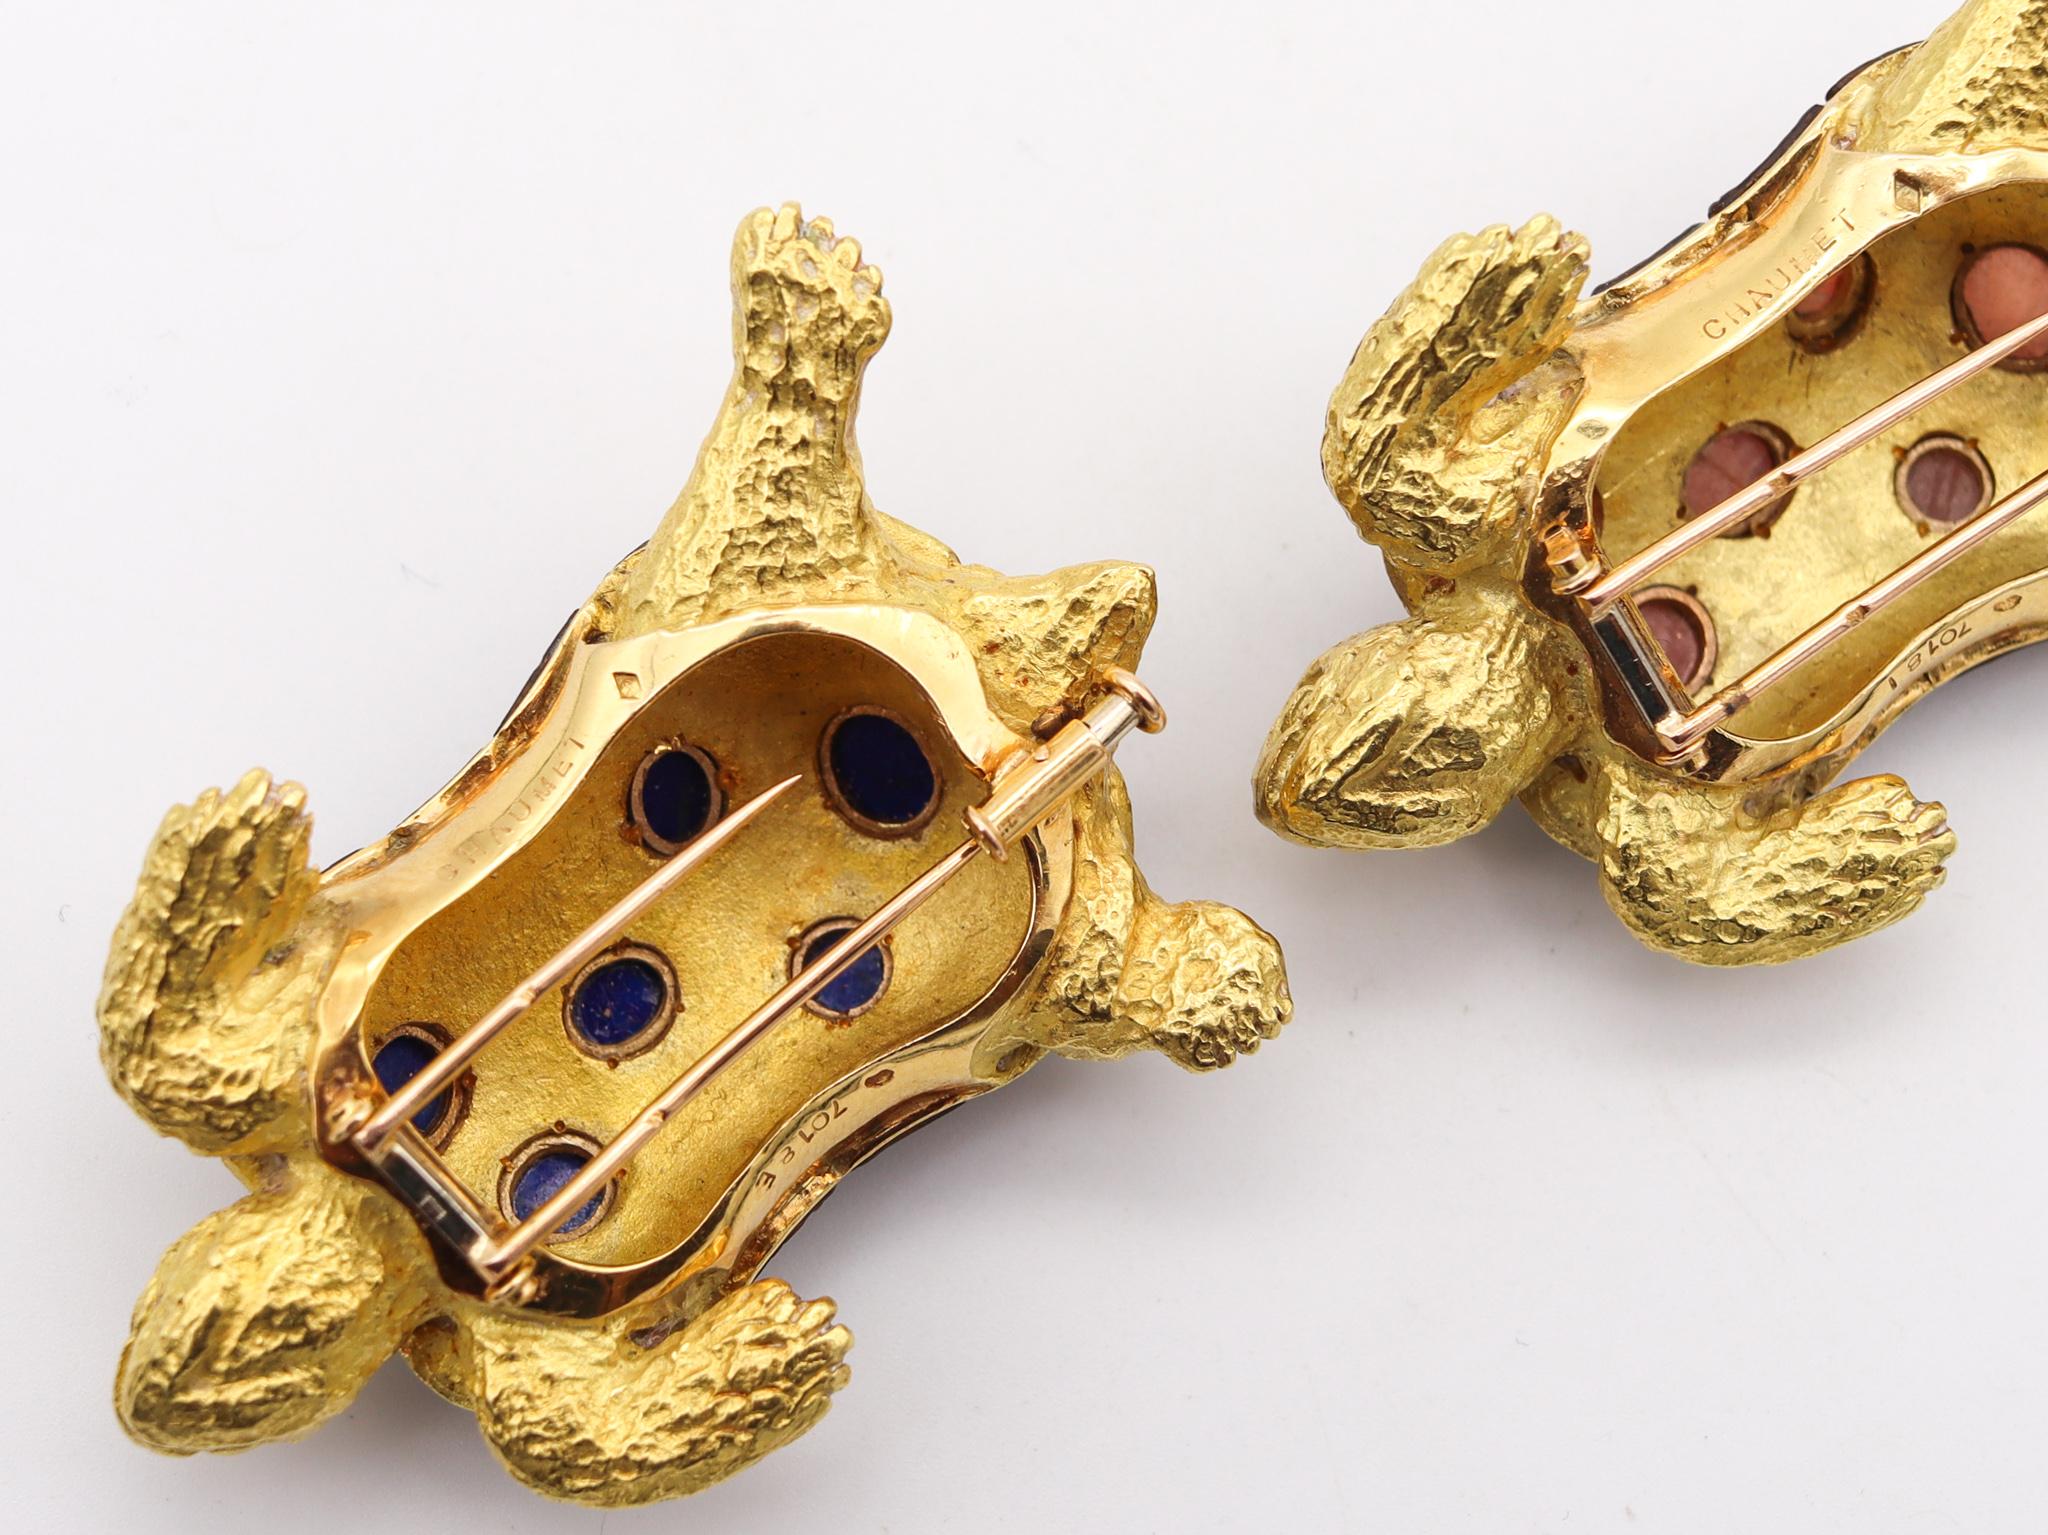 Chaumet 1960 Paris Pair Of Turtles Brooches 18Kt Gold 13.82 Cts Diamonds & Gems In Excellent Condition For Sale In Miami, FL